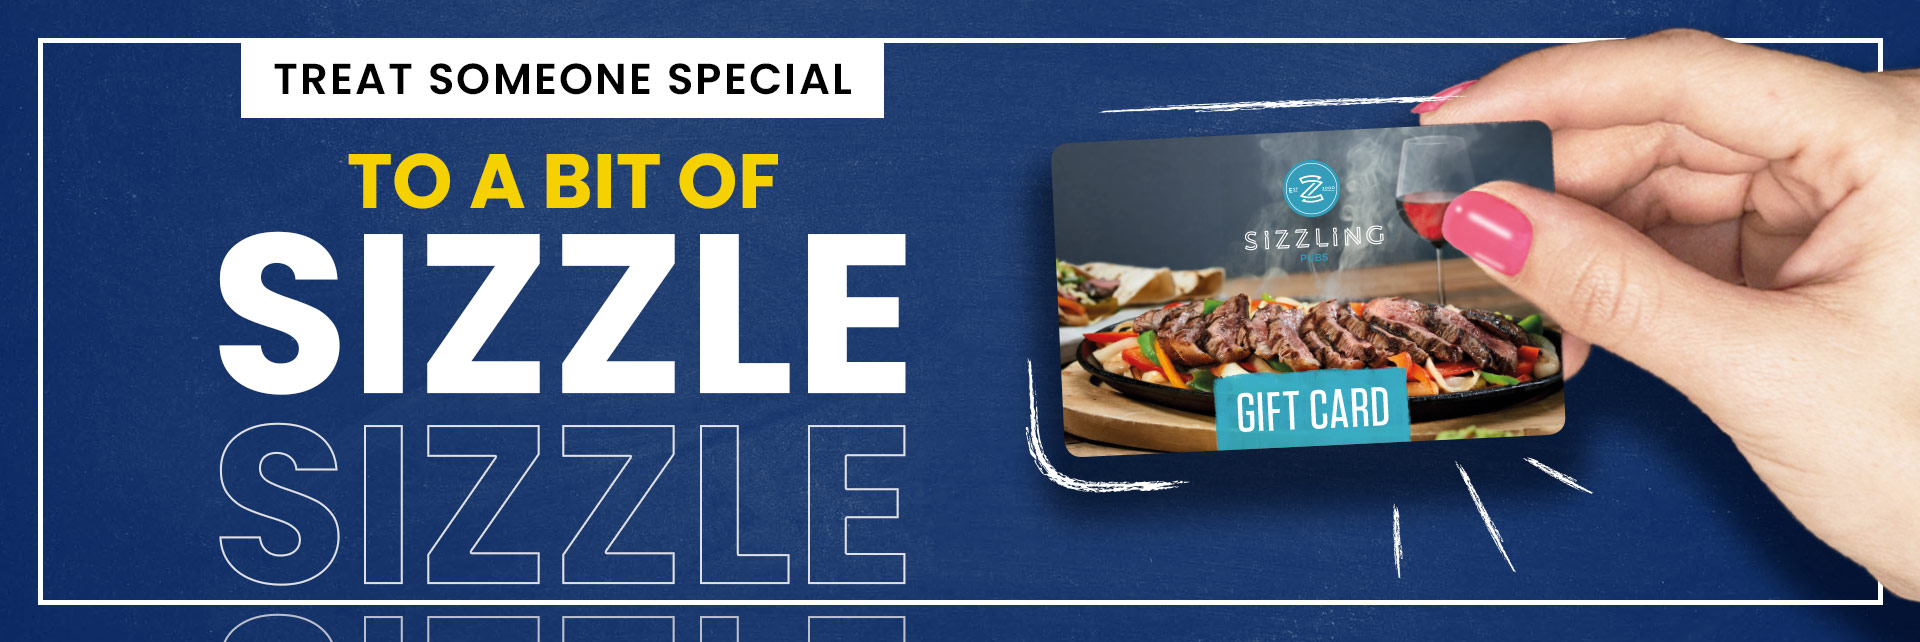 Sizzling Pubs Gift Card at Bay Horse in Blackpool